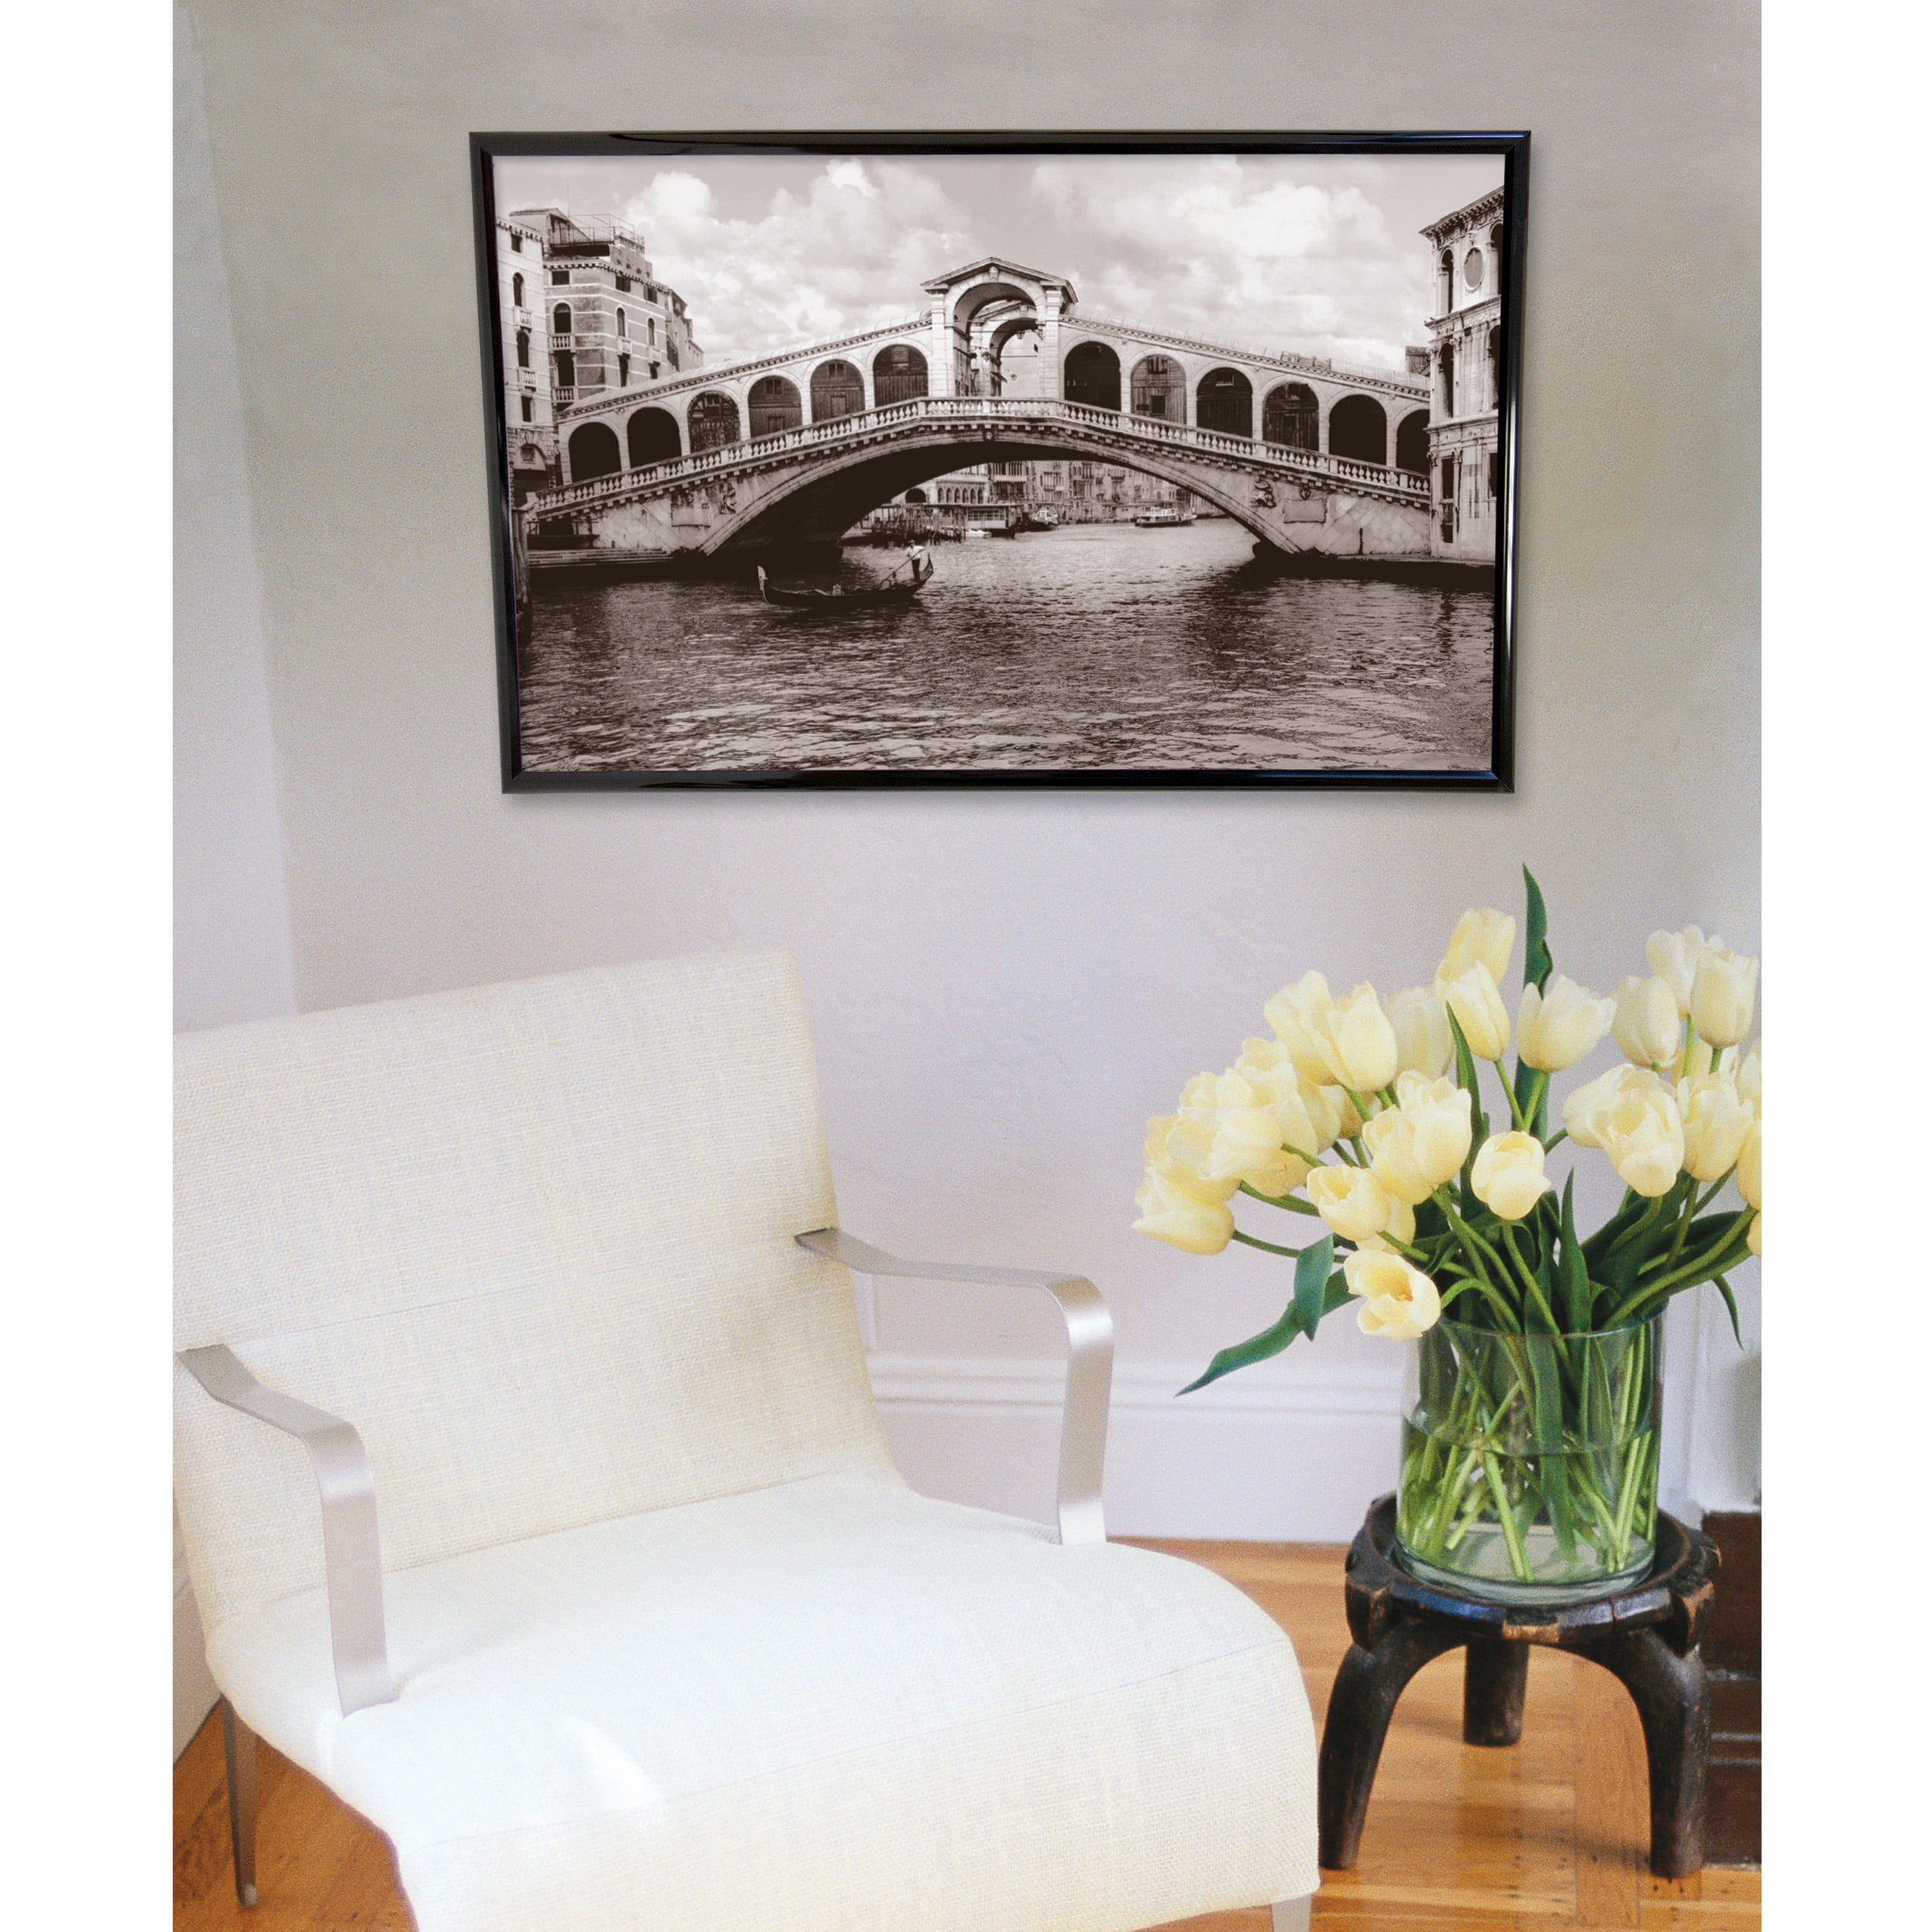 Mainstays 20 X 30 Trendsetter Poster Photo Picture Document  Frame Home Decor 